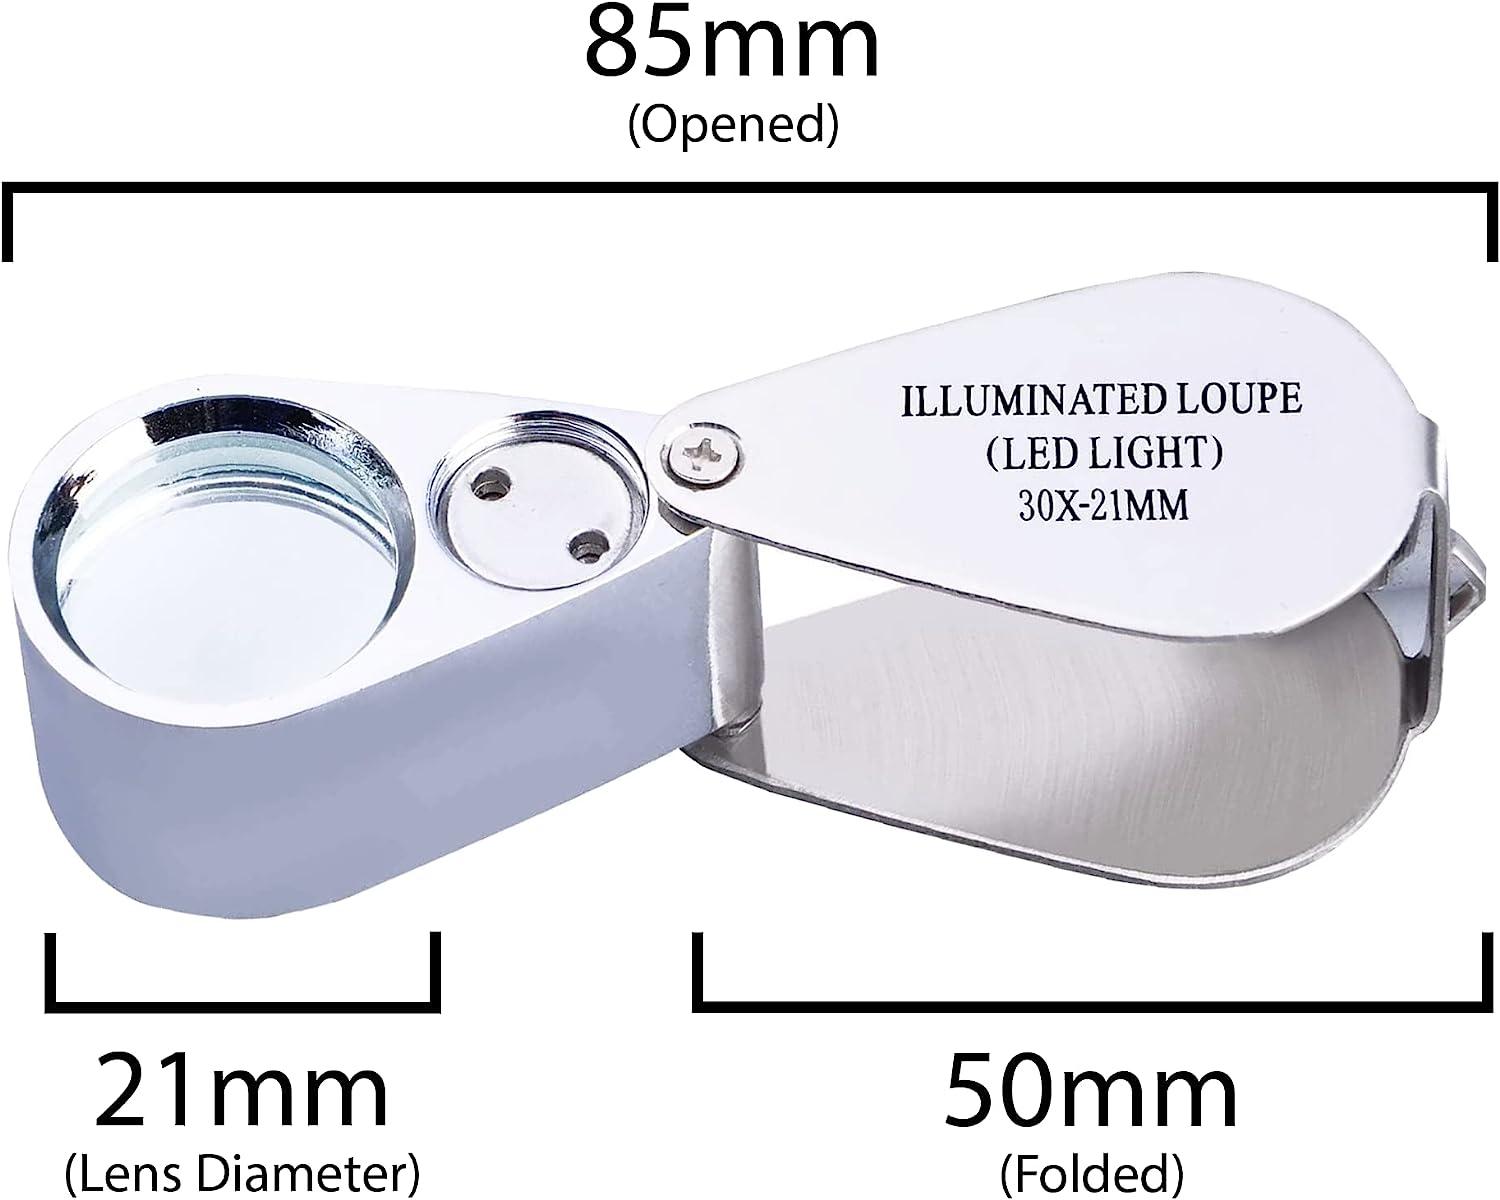 30X Jewelers Loupe Magnifying Glass with Light, Jewelry Magnifier Eye Loop,  Metal Pocket Magnifying Glass for Jewelry, Plants, Diamonds, Gems, Coins 